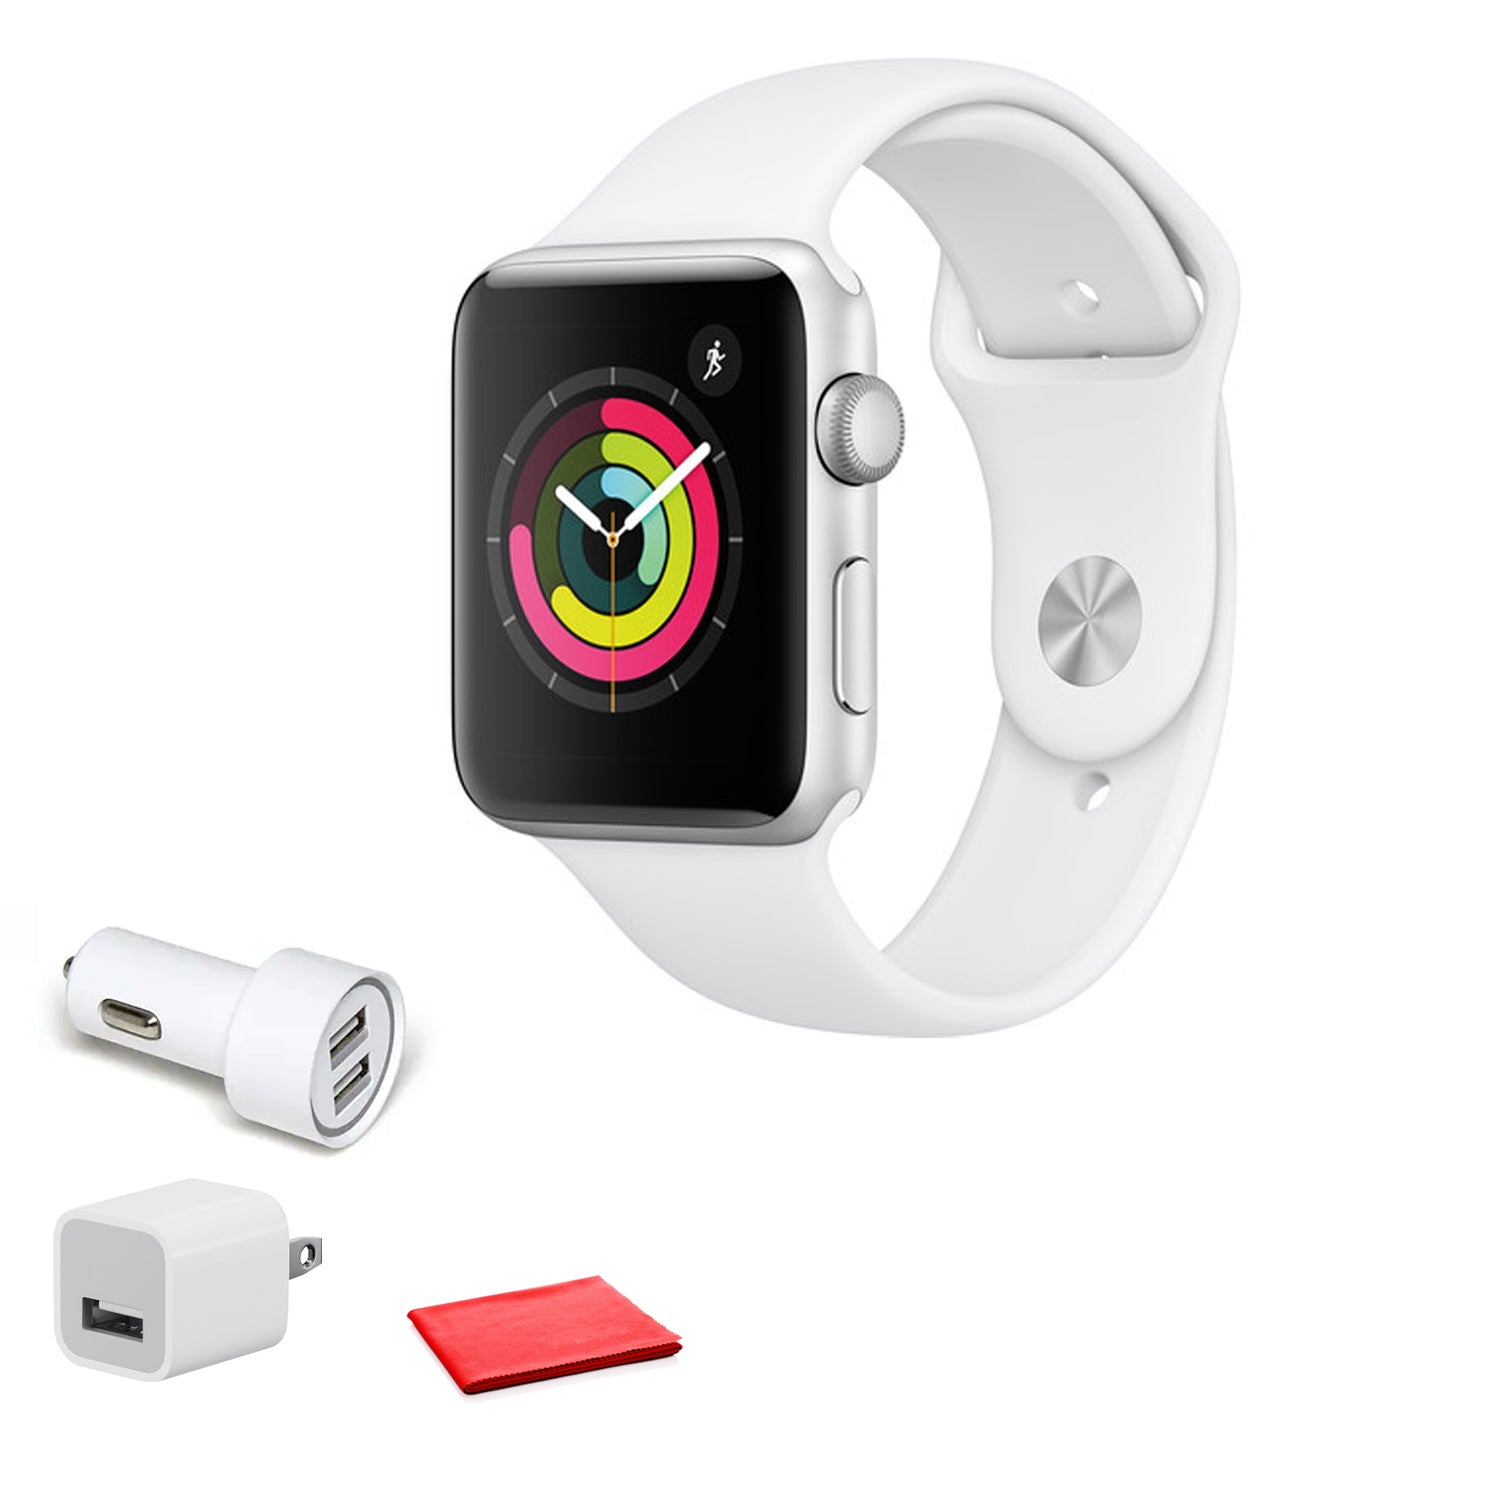 Apple Watch Series 3 Smartwatch (GPS Only, White Sport Band) with Cleaning Kit,